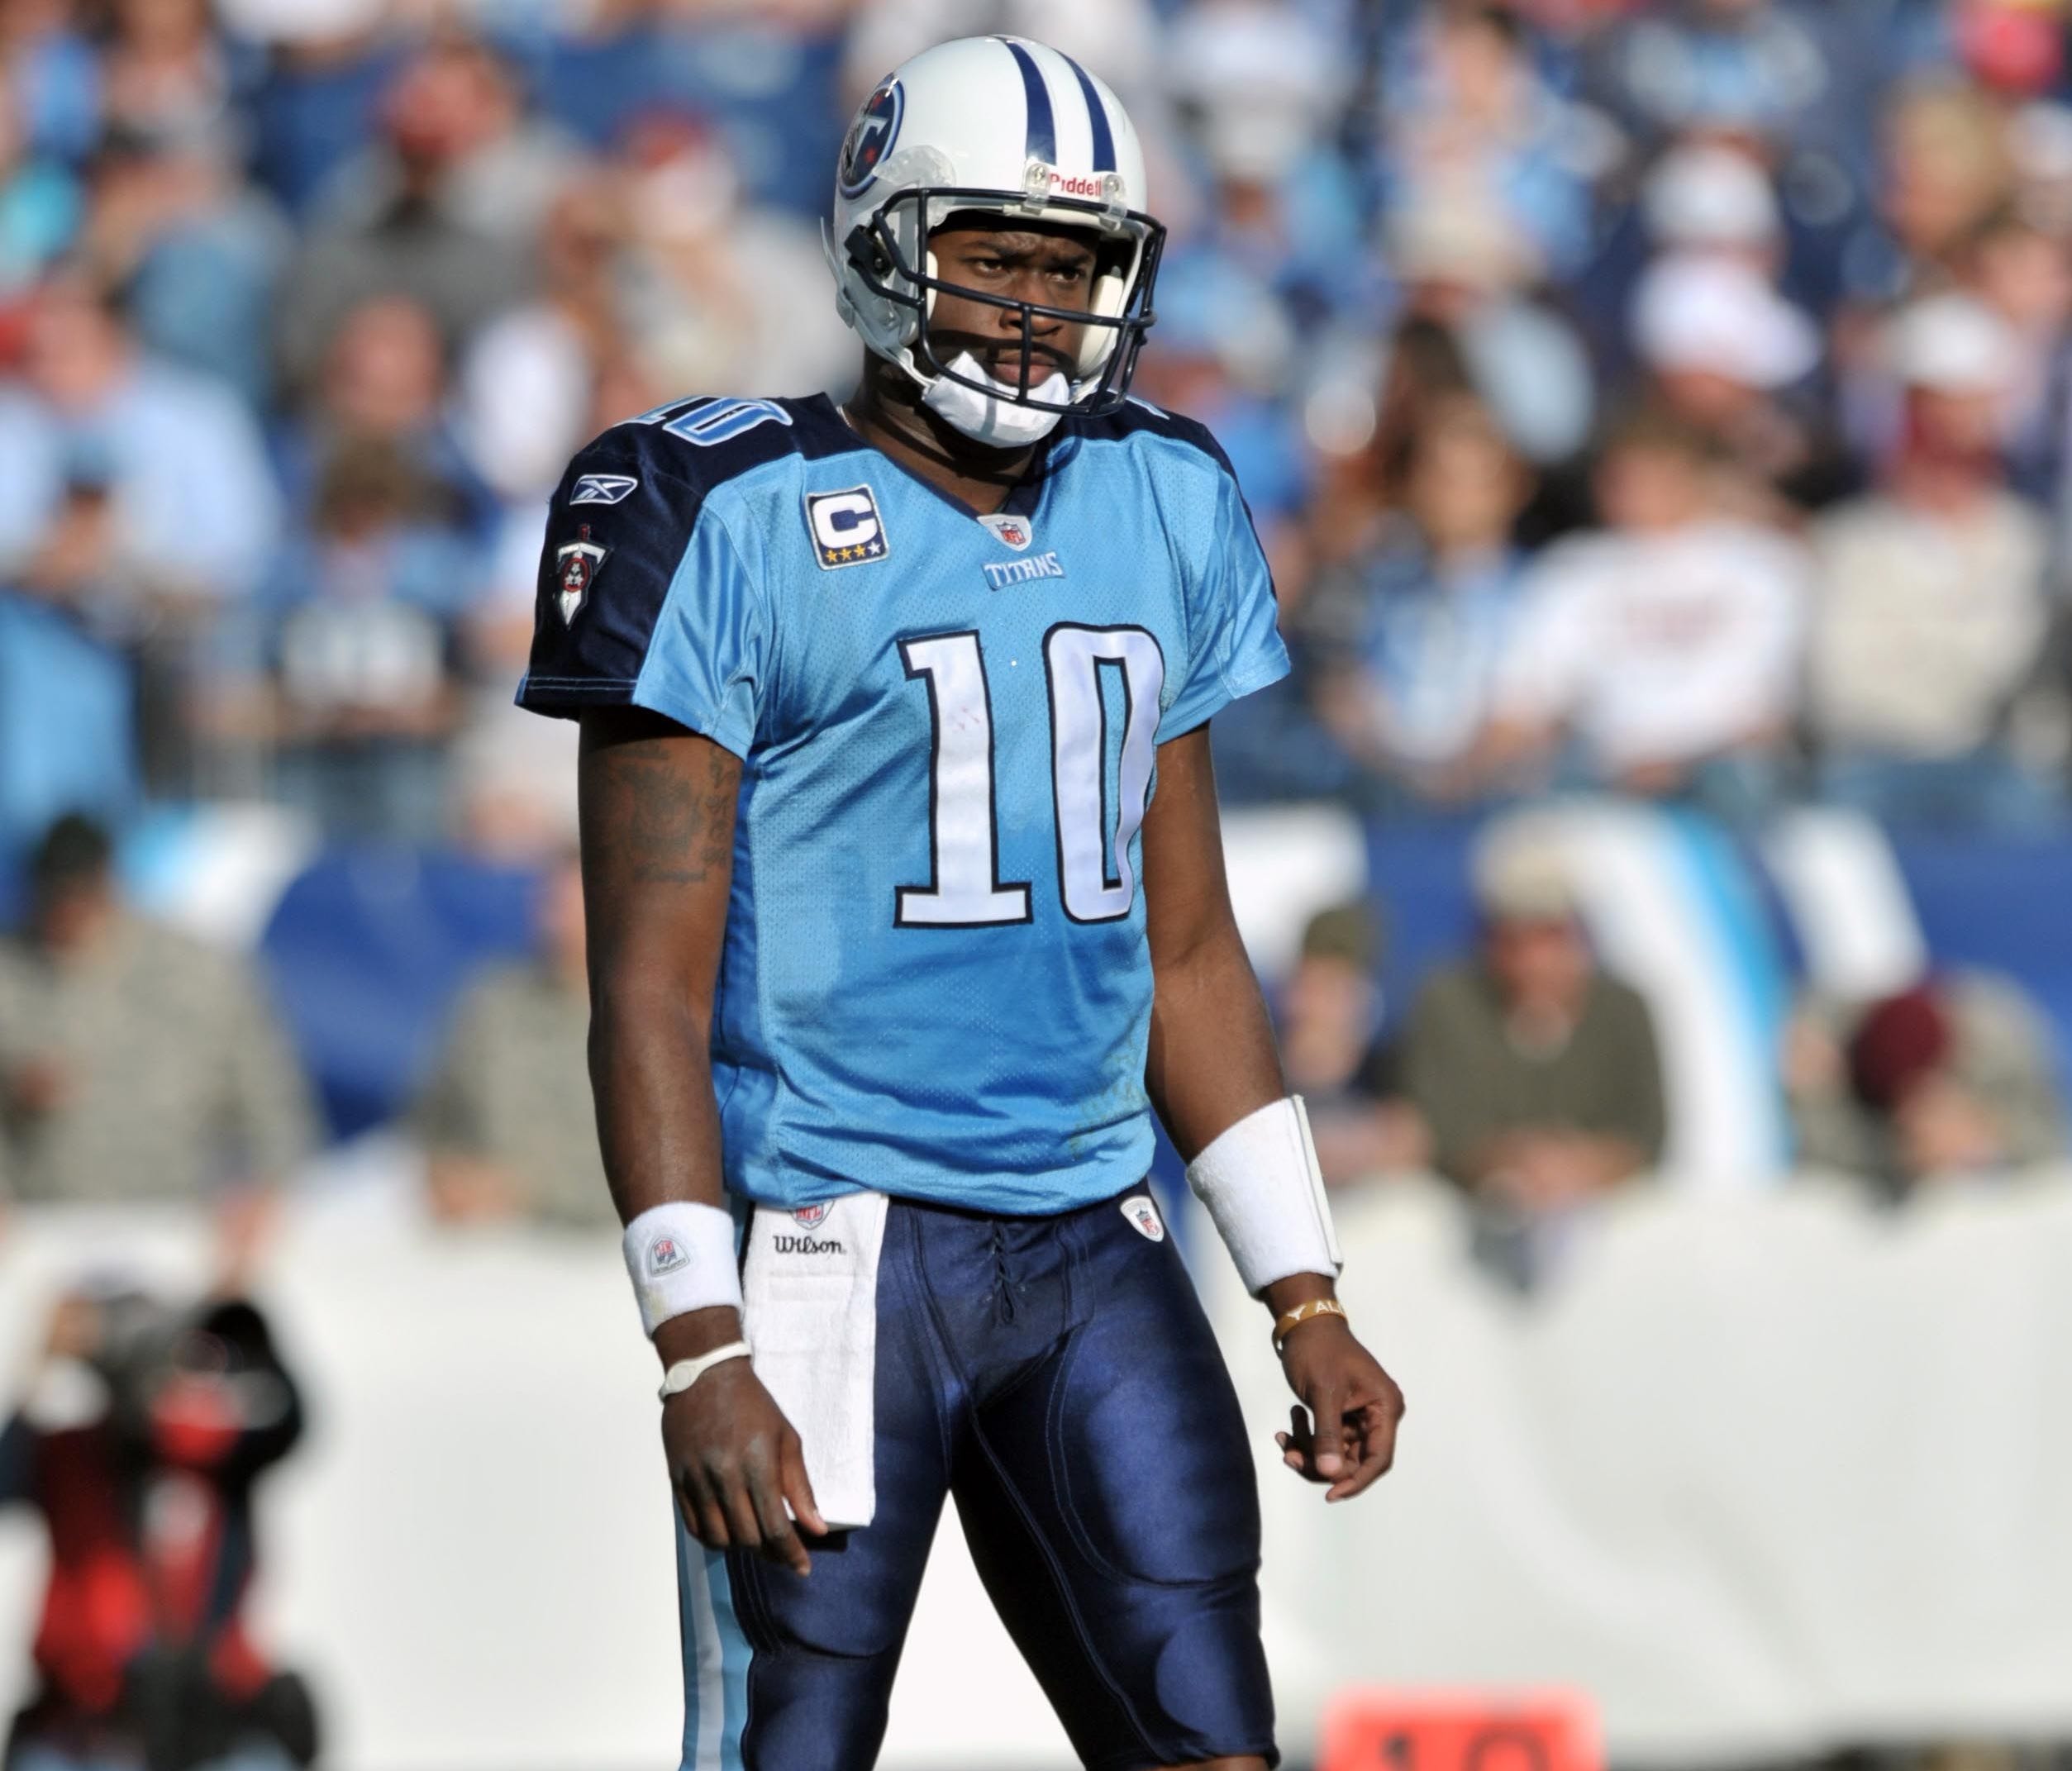 Former Titans quarterback Vince Young had harsh words for Ryan Fitzpatrick and former coach Jeff Fisher.